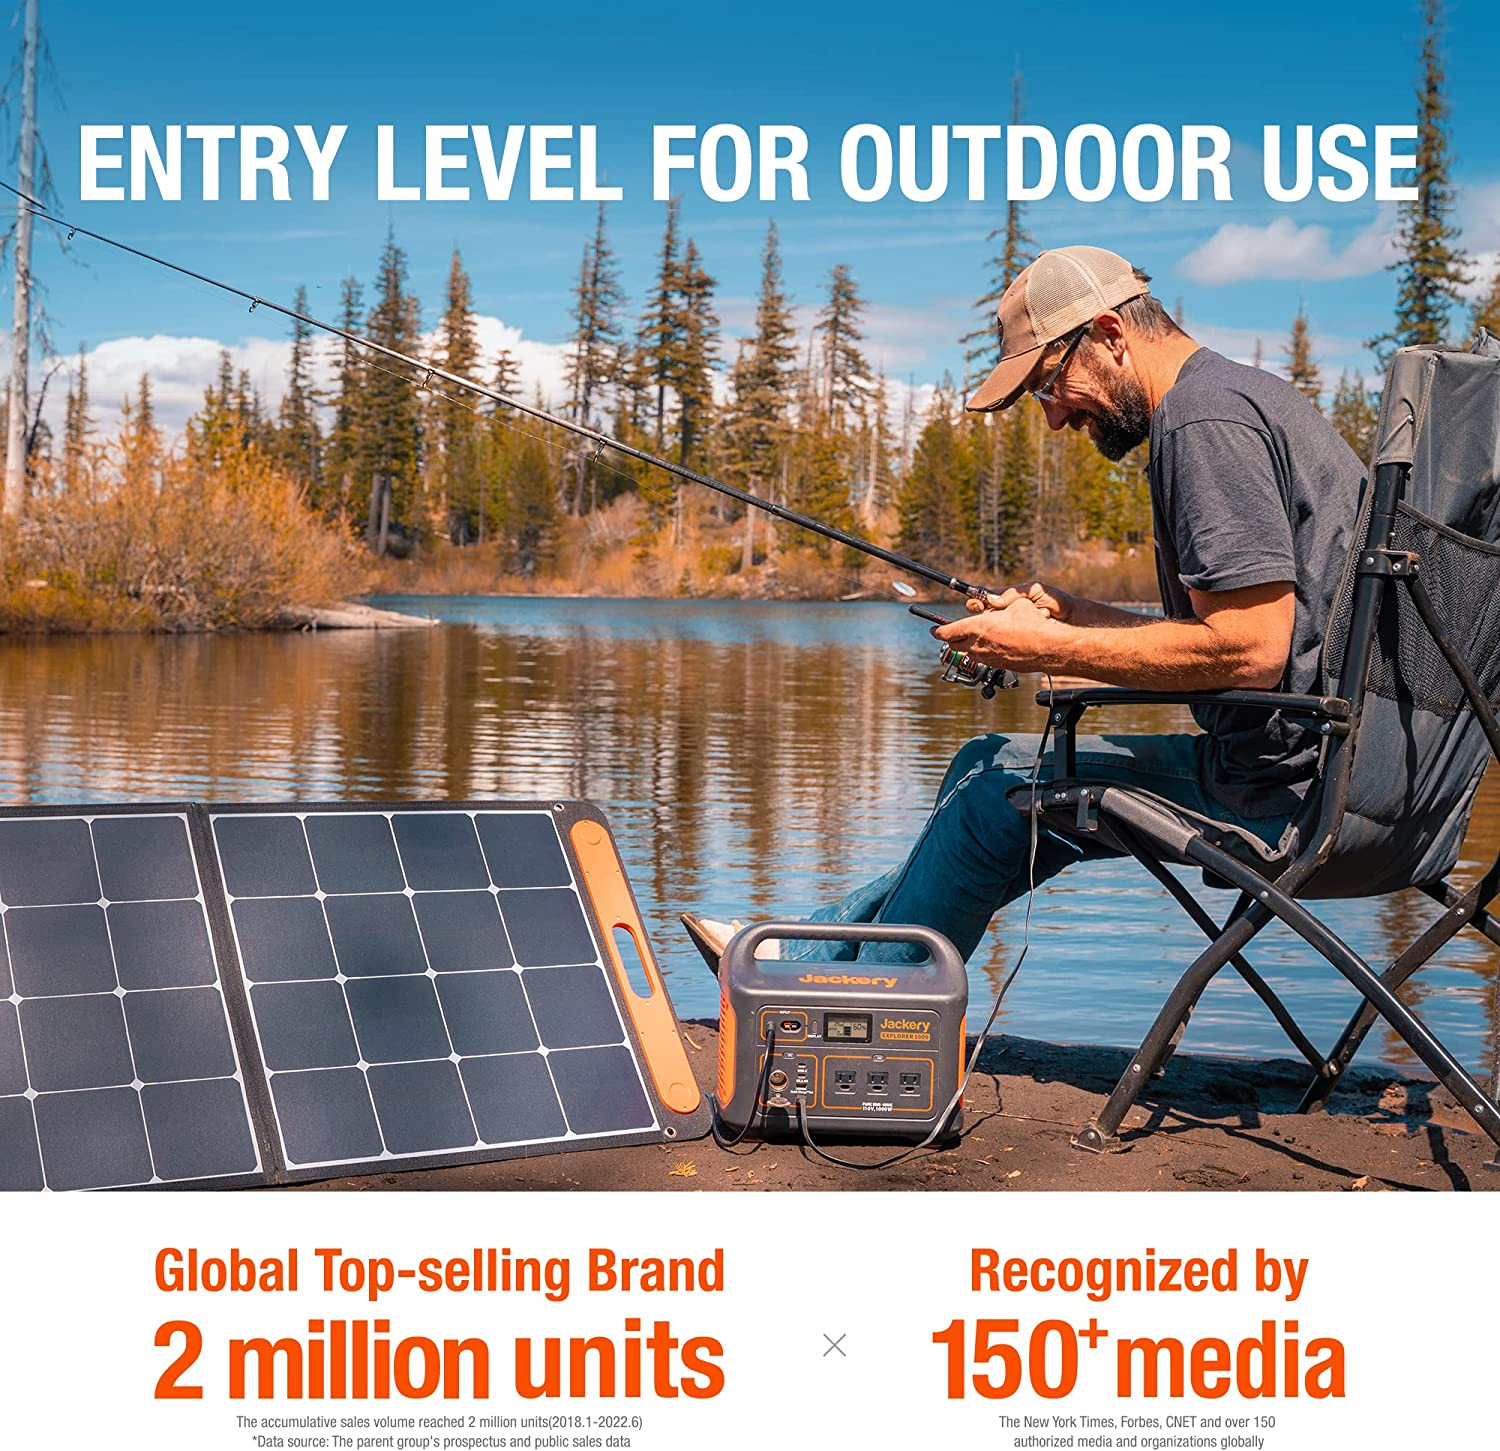 Jackery Explorer 1000 Portable Power Station, 1002Wh Capacity with 3 x 1000W AC Outlets, Solar Generator (Solar Panel Not Included) for Home Backup panels